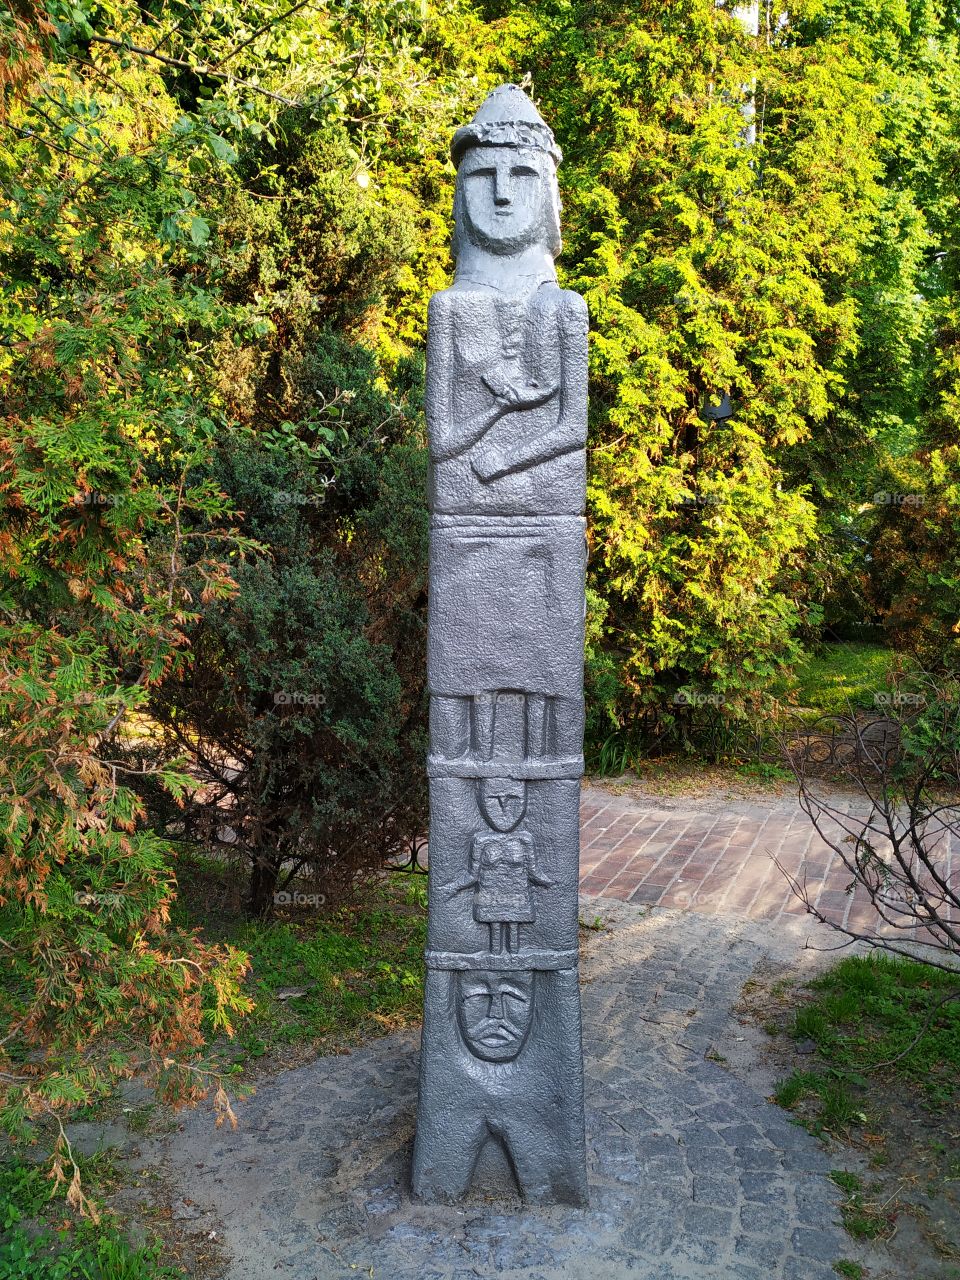 The old sculpture in the park. Kiev